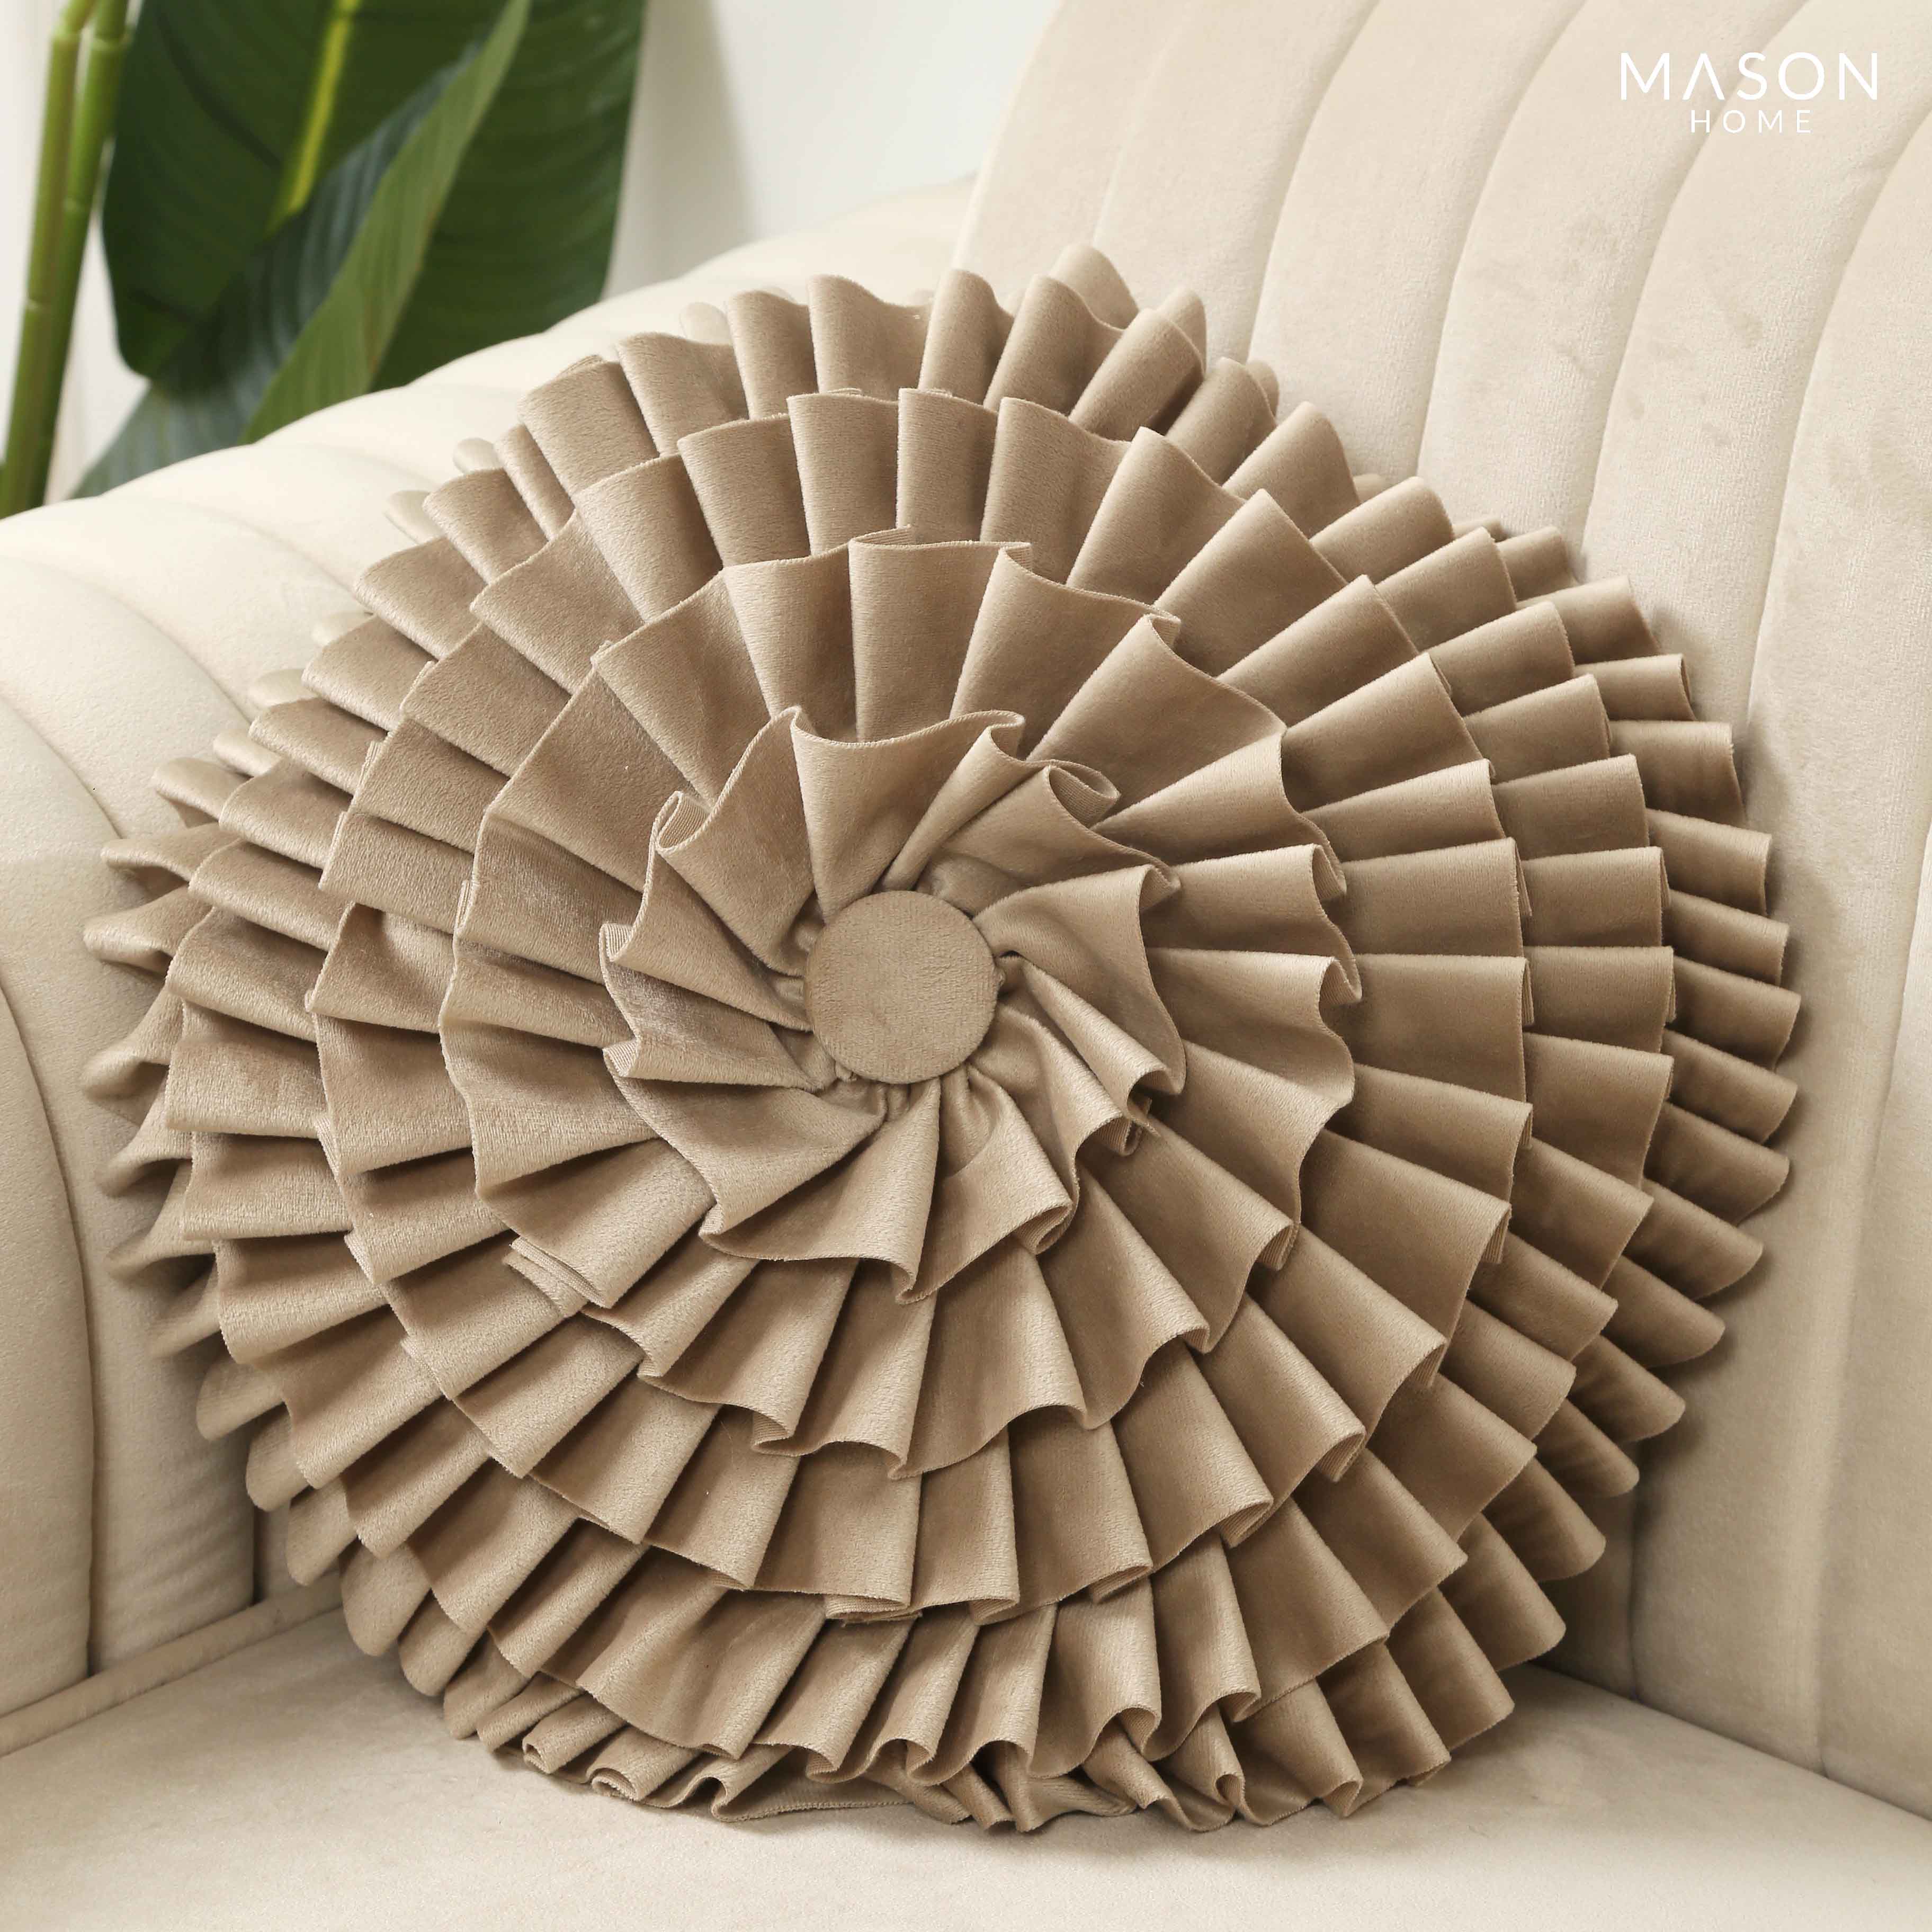 Floret Beige Round Cover With Filler